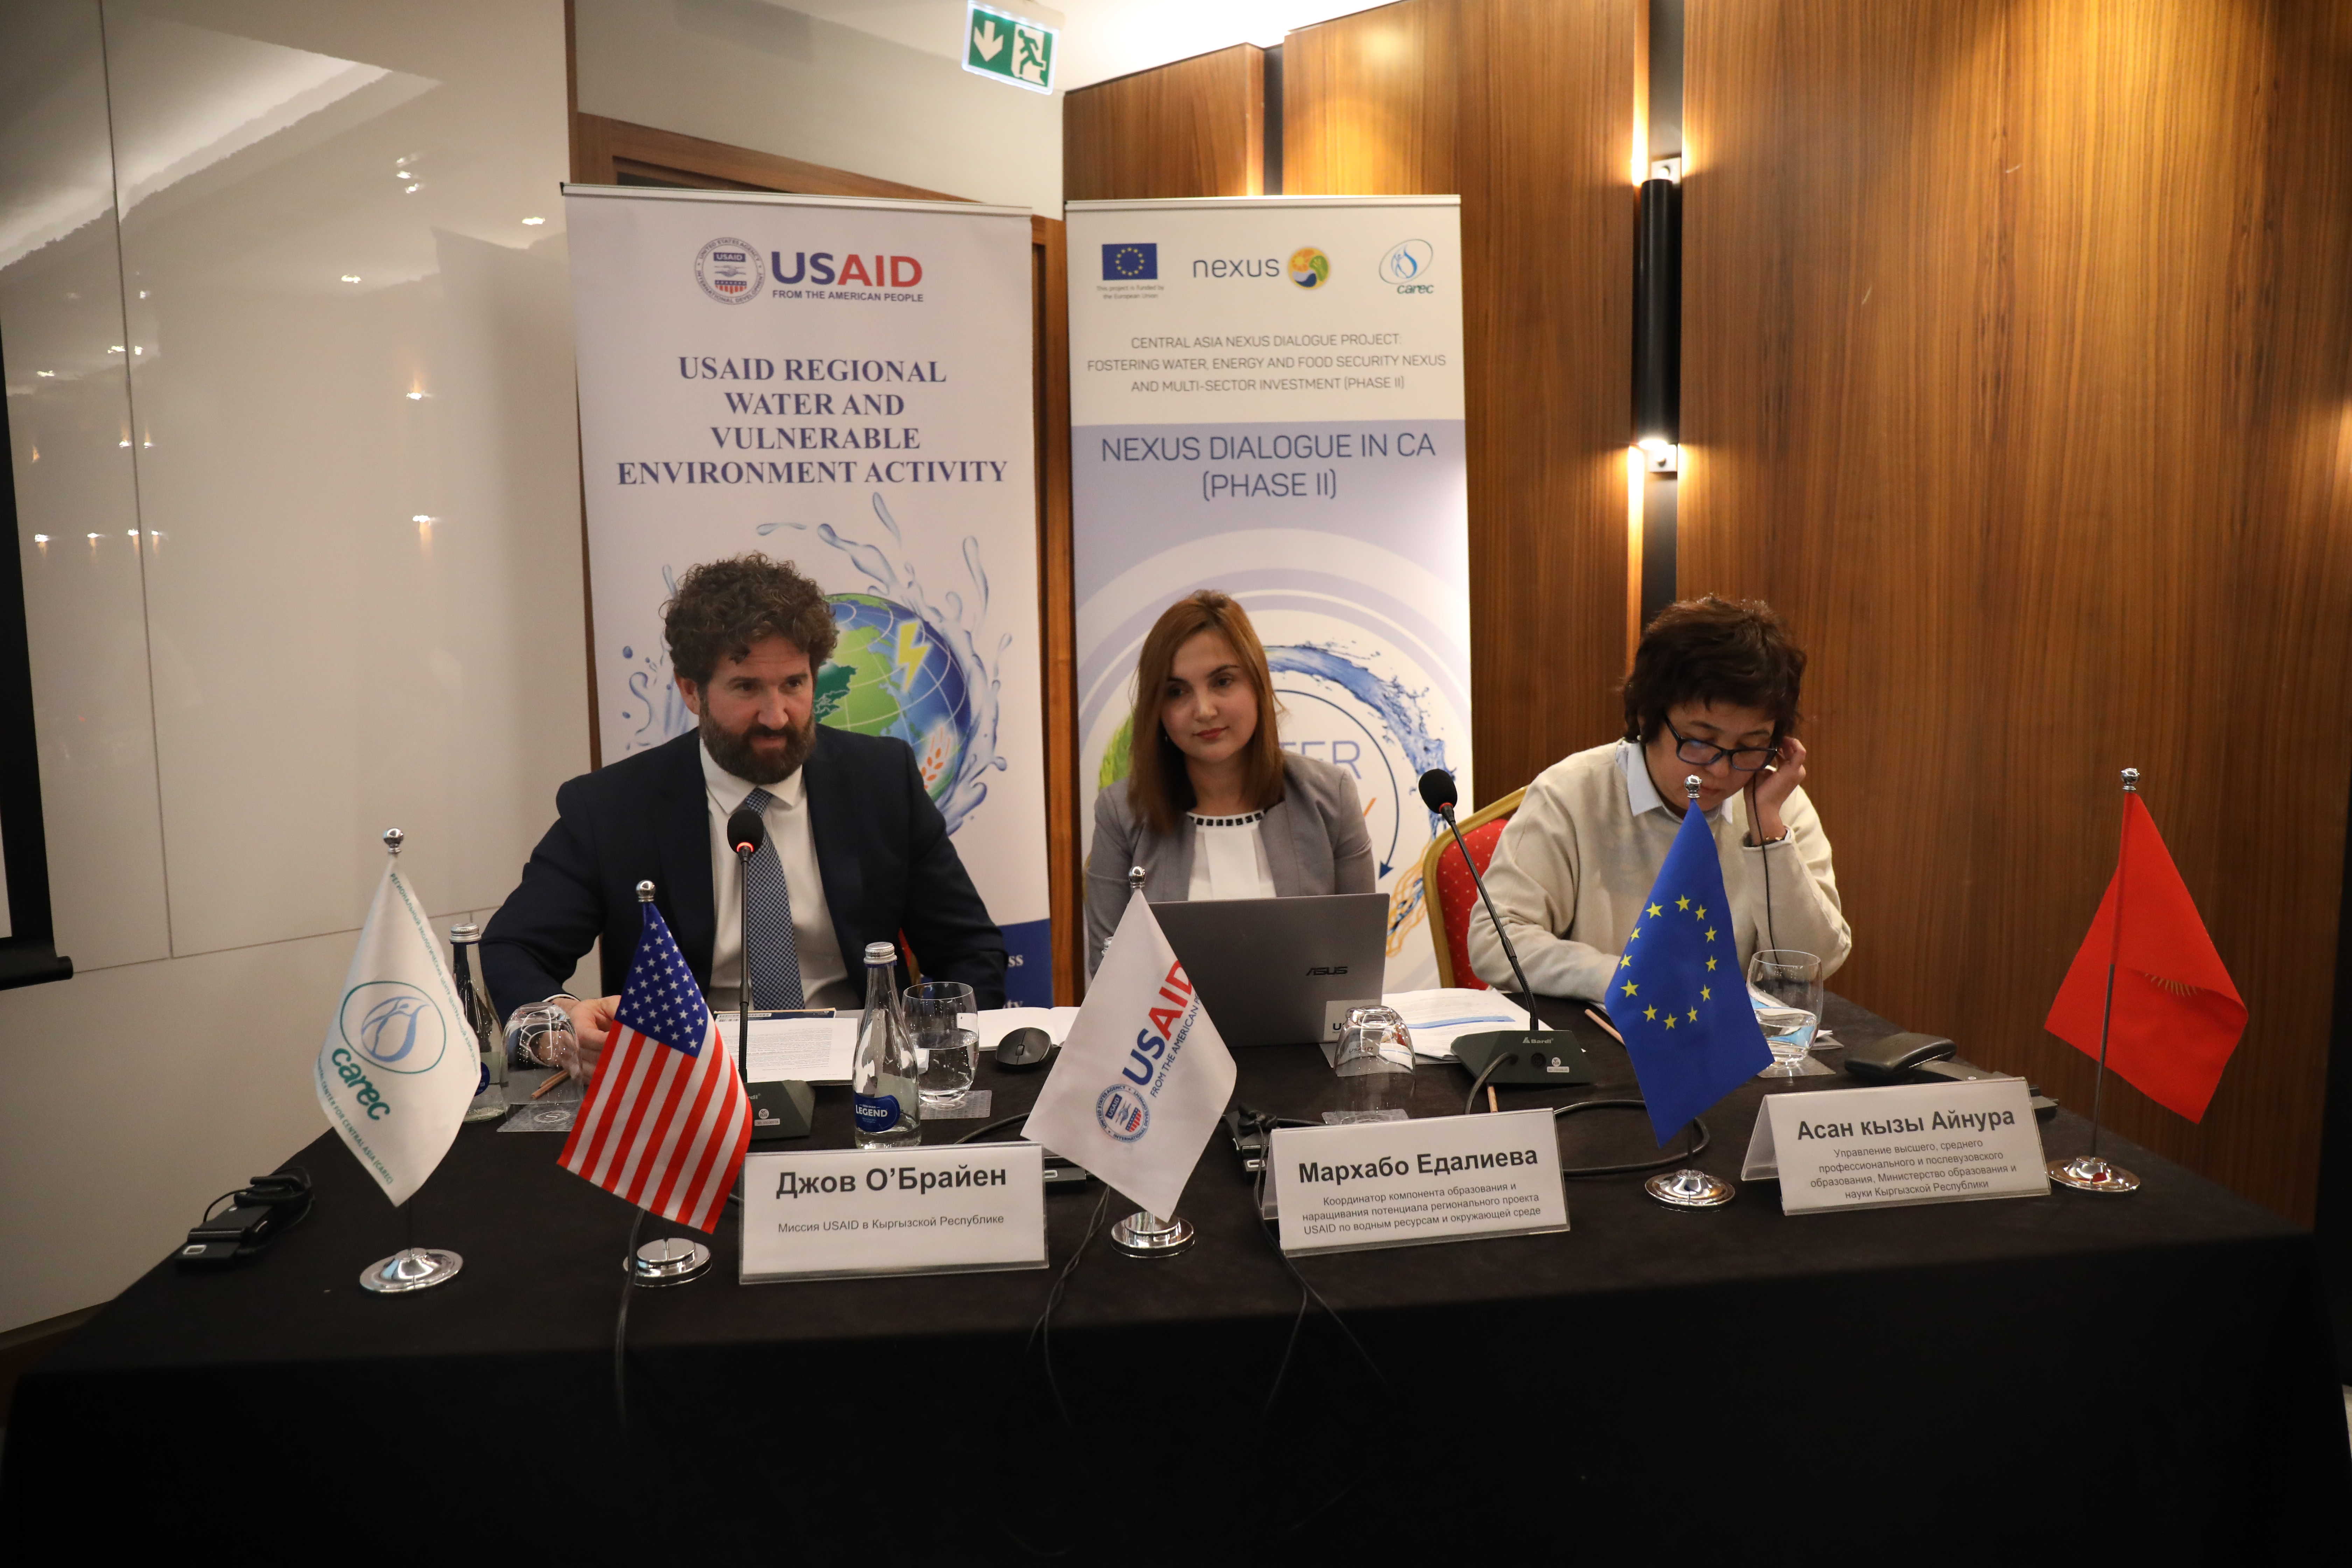 USAID launches a “Community of Practice” to strengthen cooperation  on water, energy, food and environmental issues in Central Asia